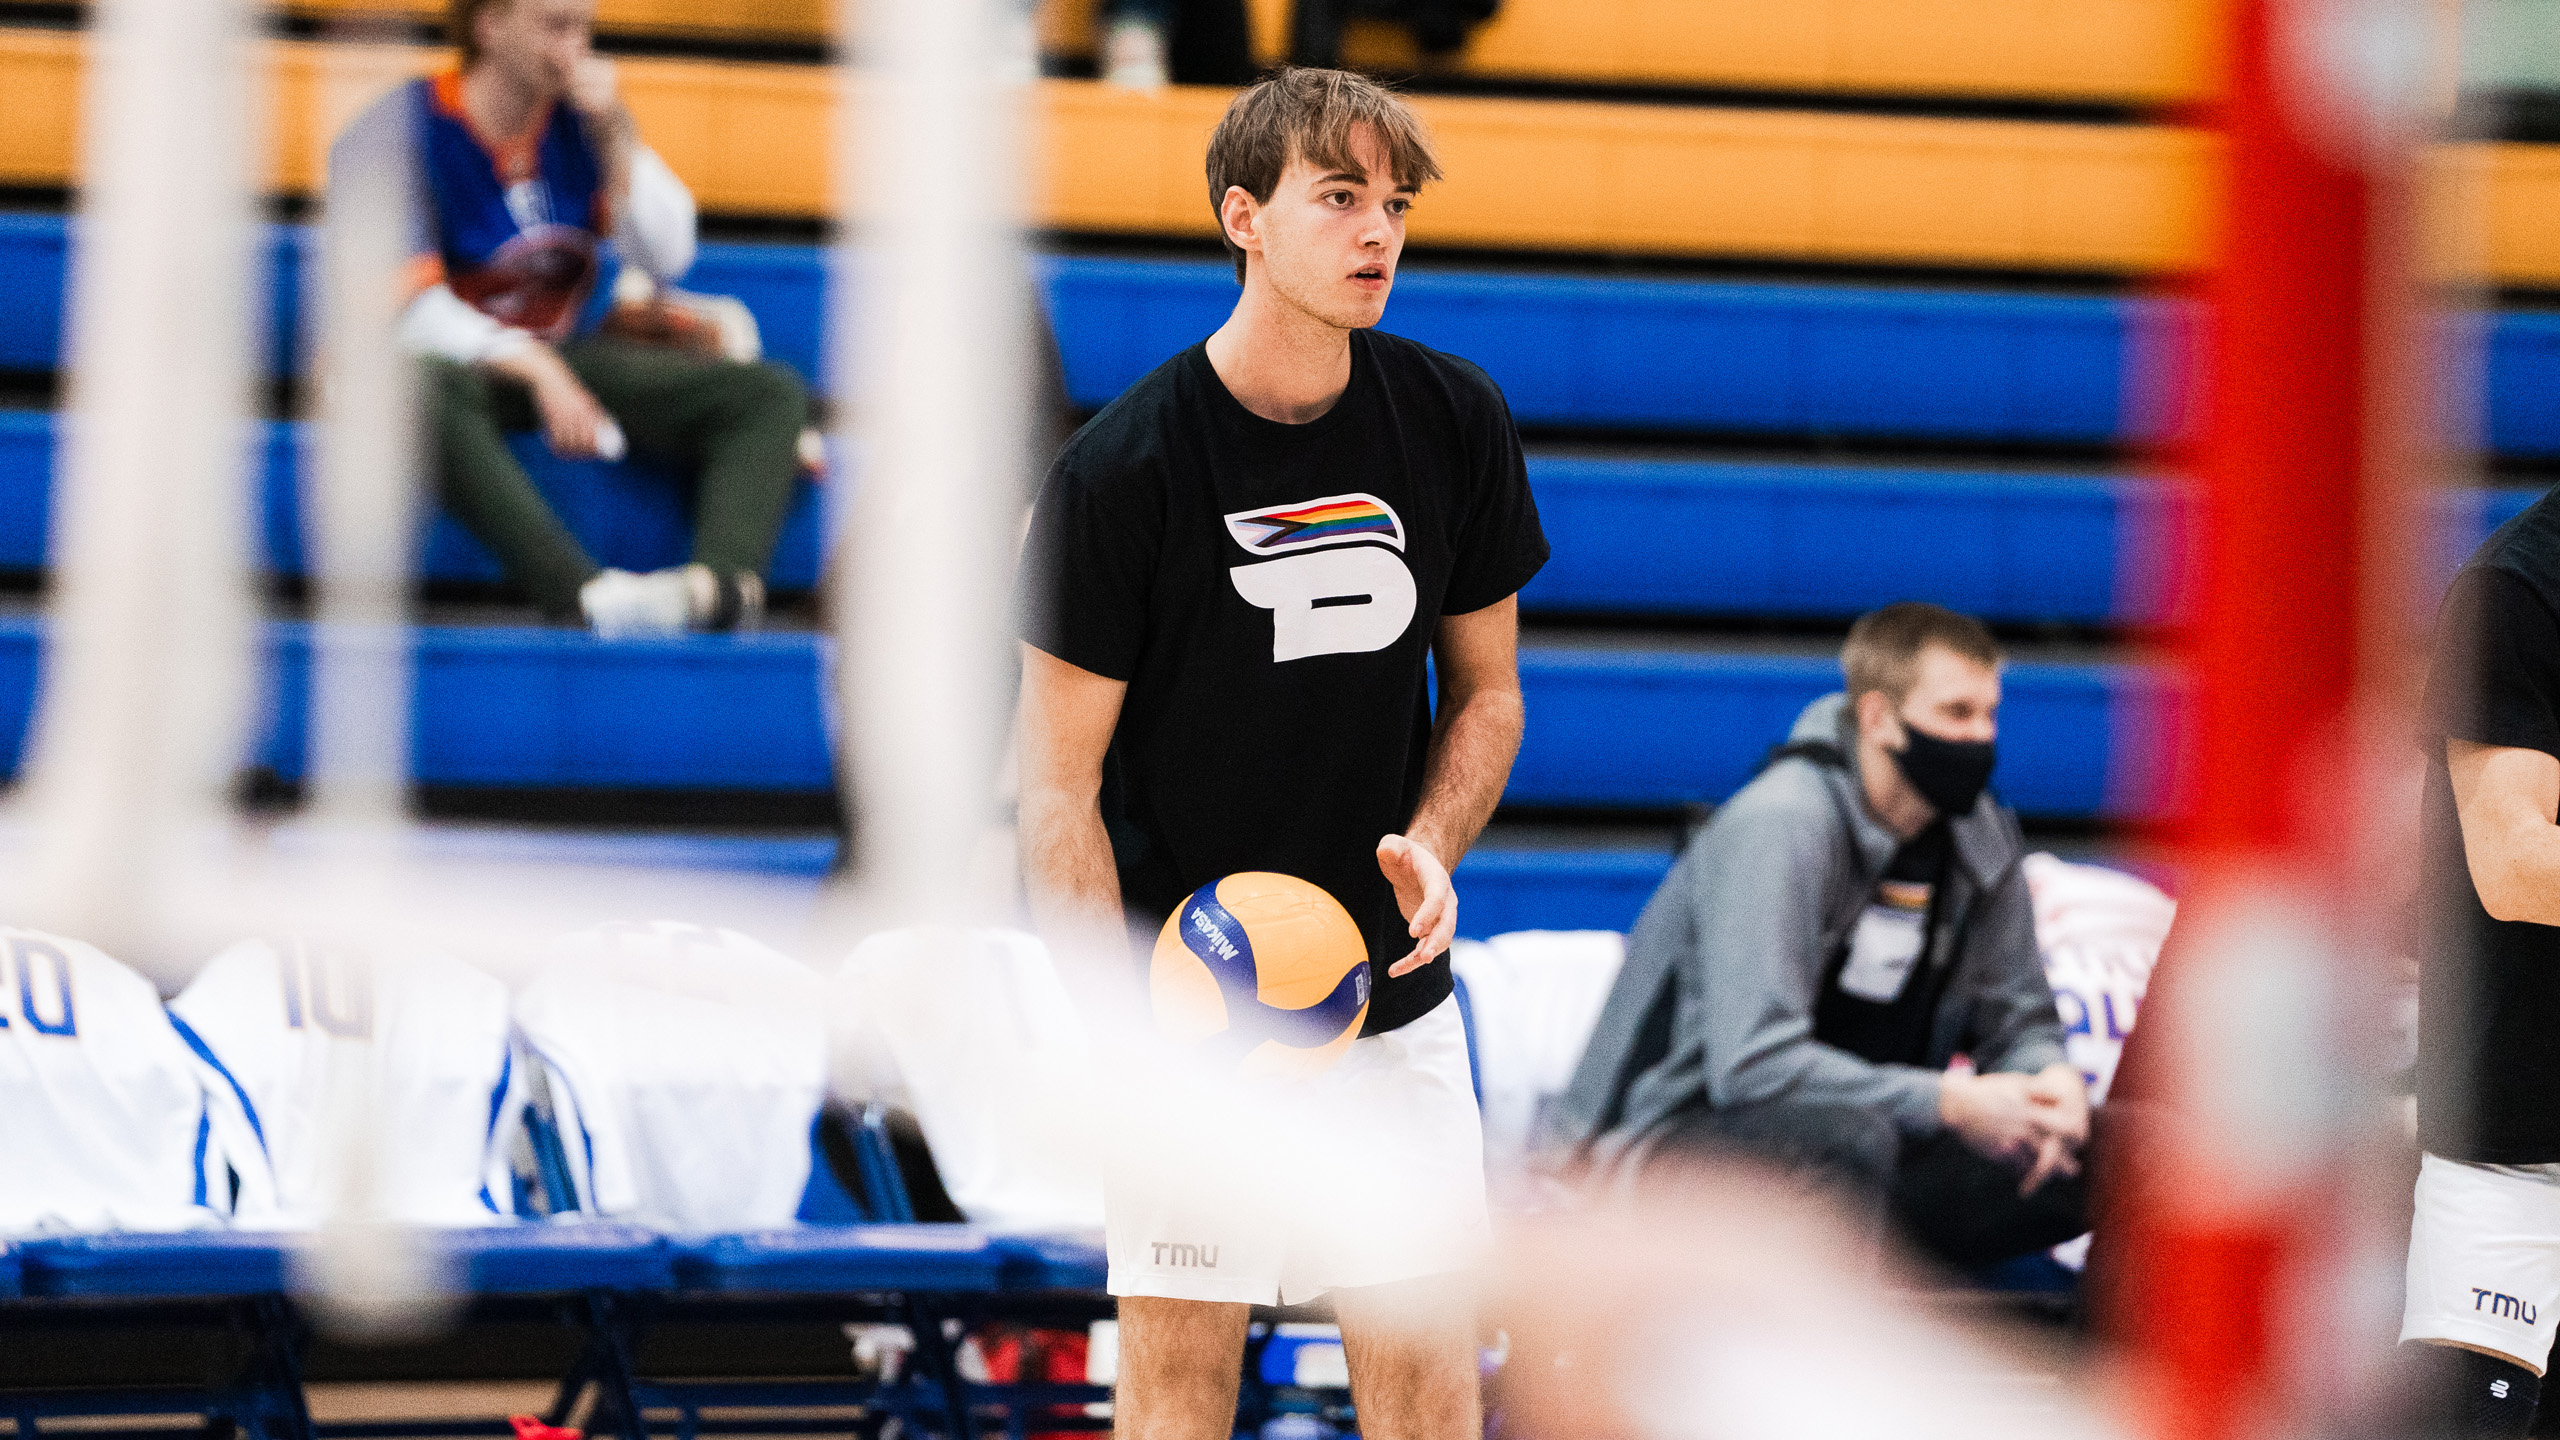 TMU men's volleyball player Lyam Krapp warms up while wearing the Bold Pride shirt